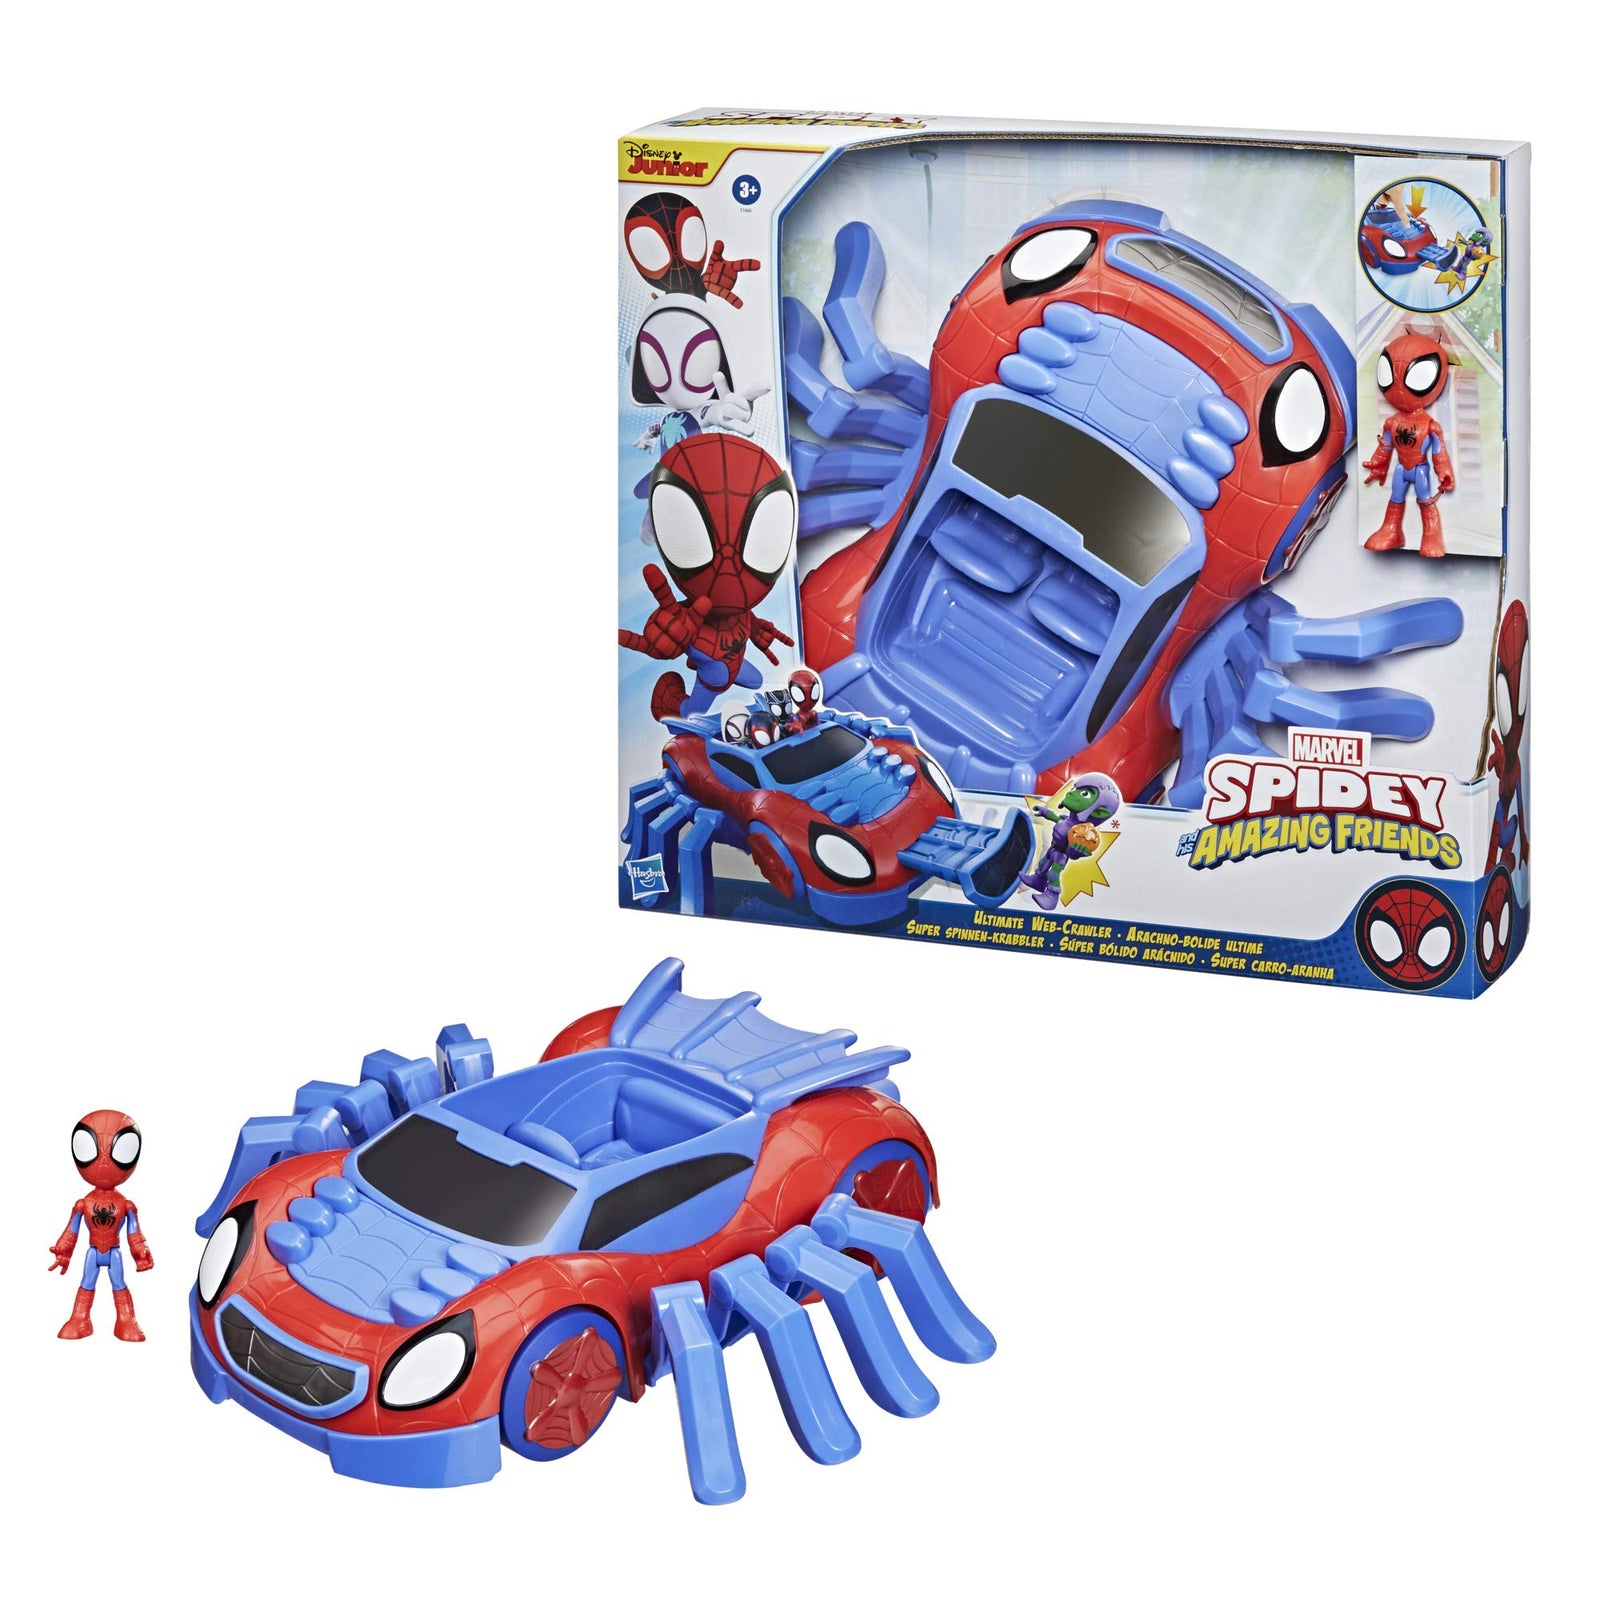 Marvel Spidey and His Amazing Friends Ultimate Web-Crawler, Spidey Stunner Feature and 4-Inch Spidey Figure, Ages 3 and Up, Frustration Free Packaging